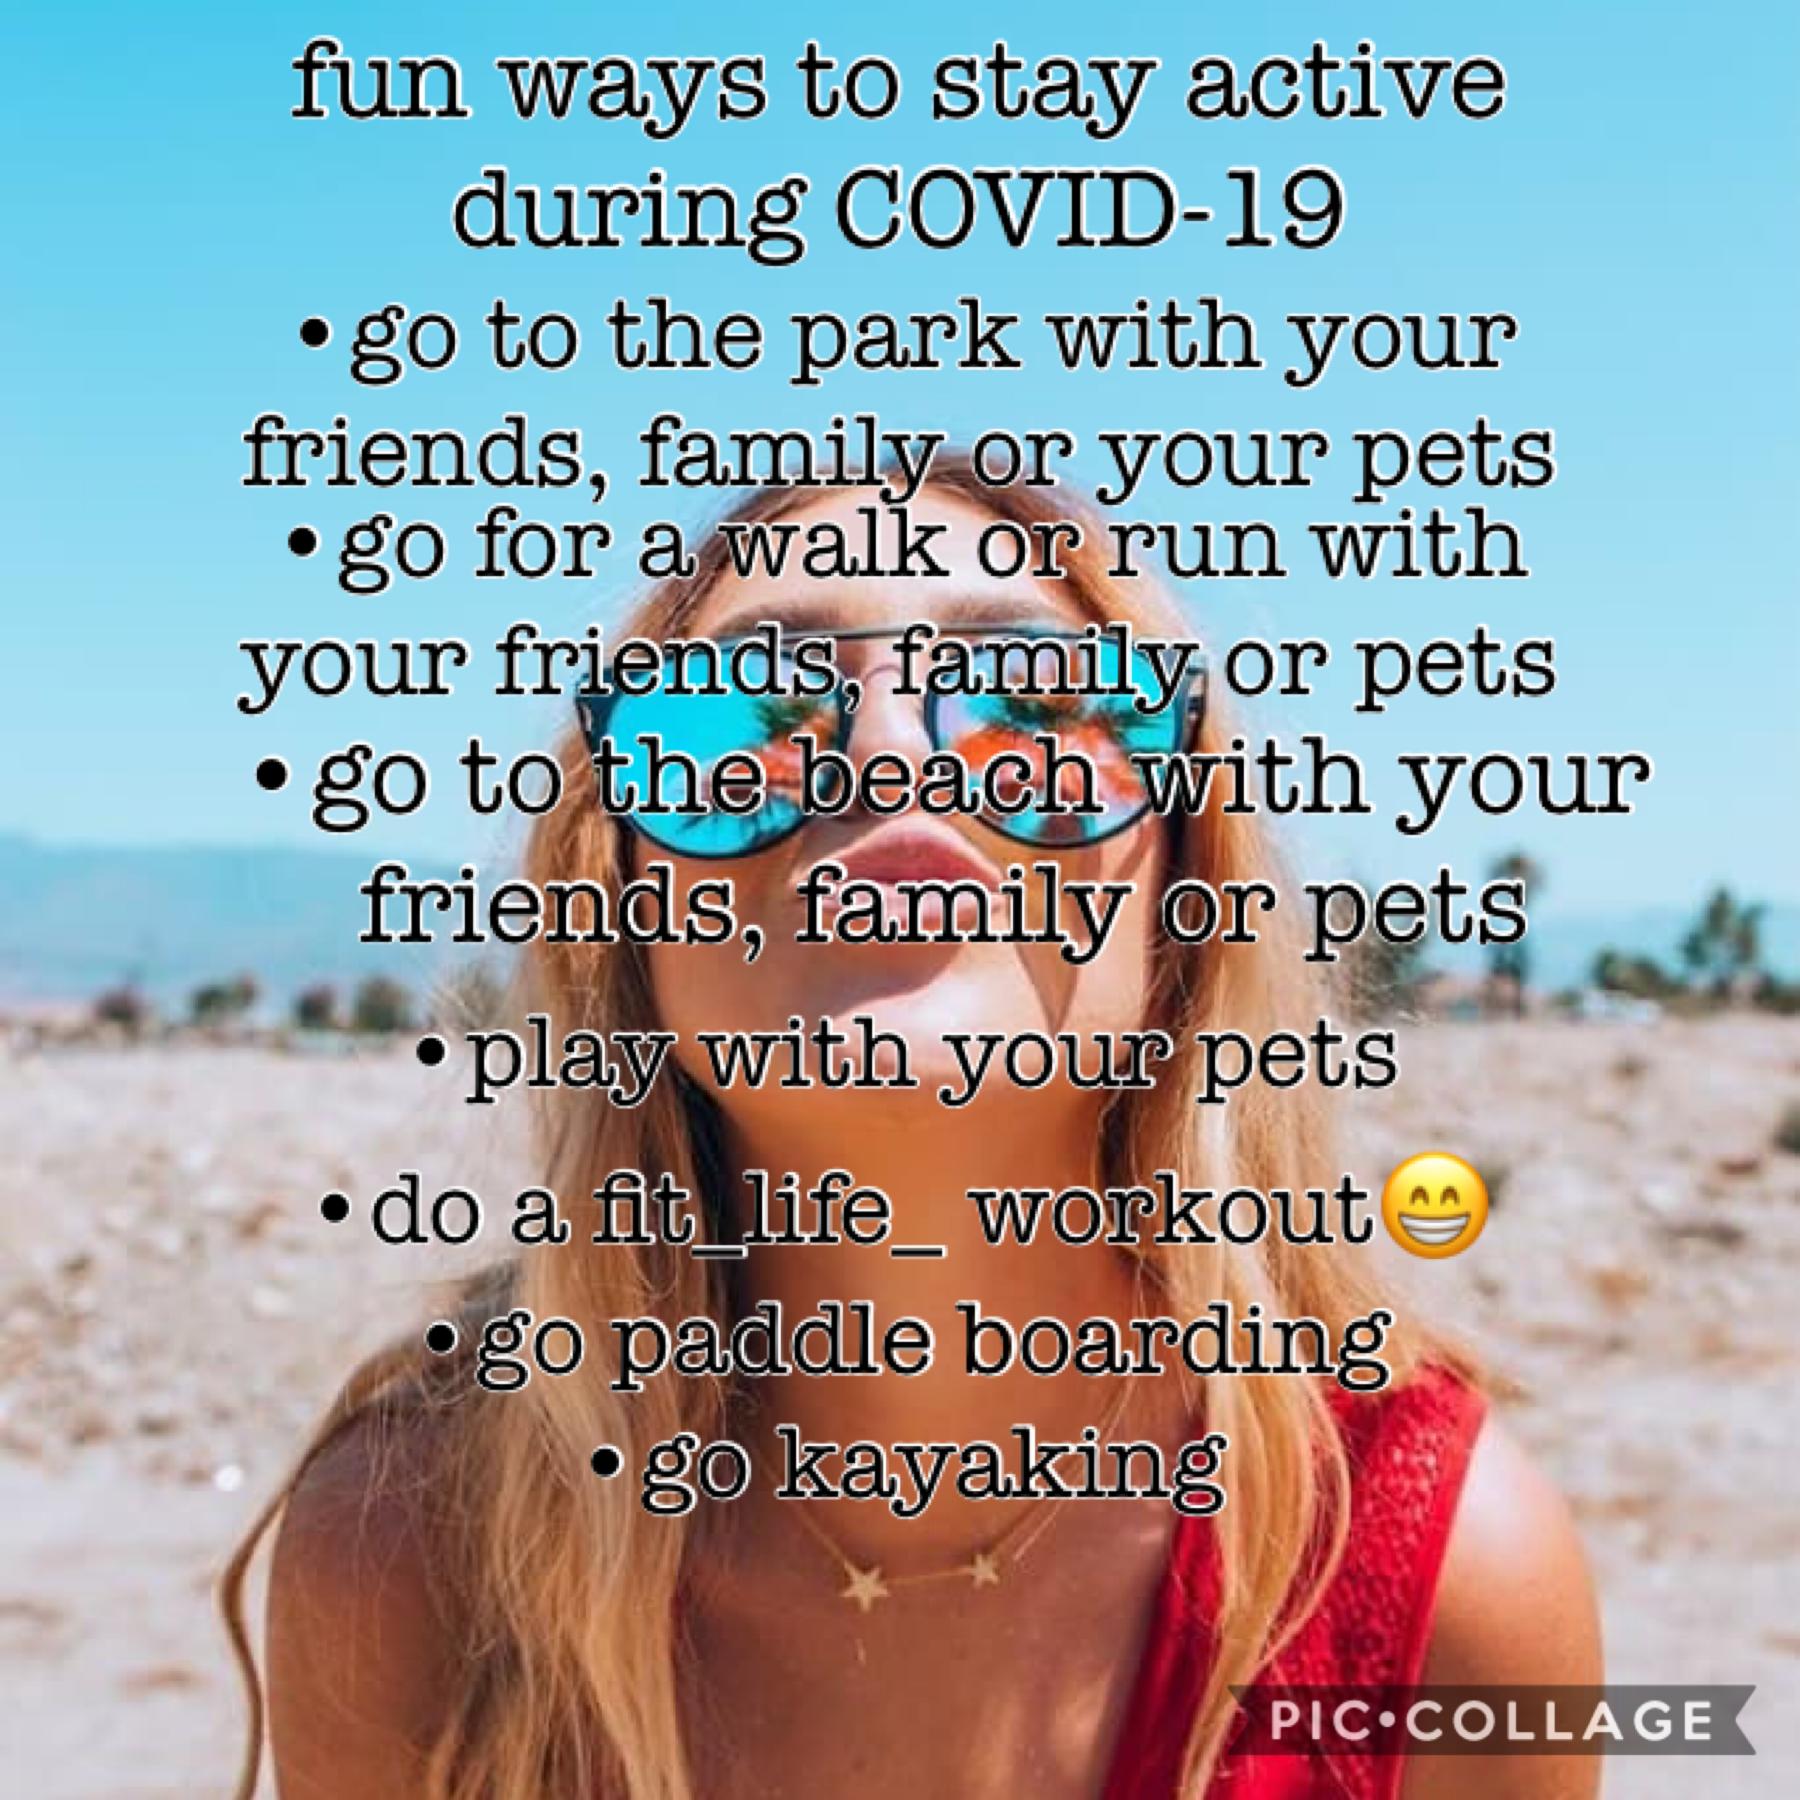 fun ways to stay active durning COVID-19